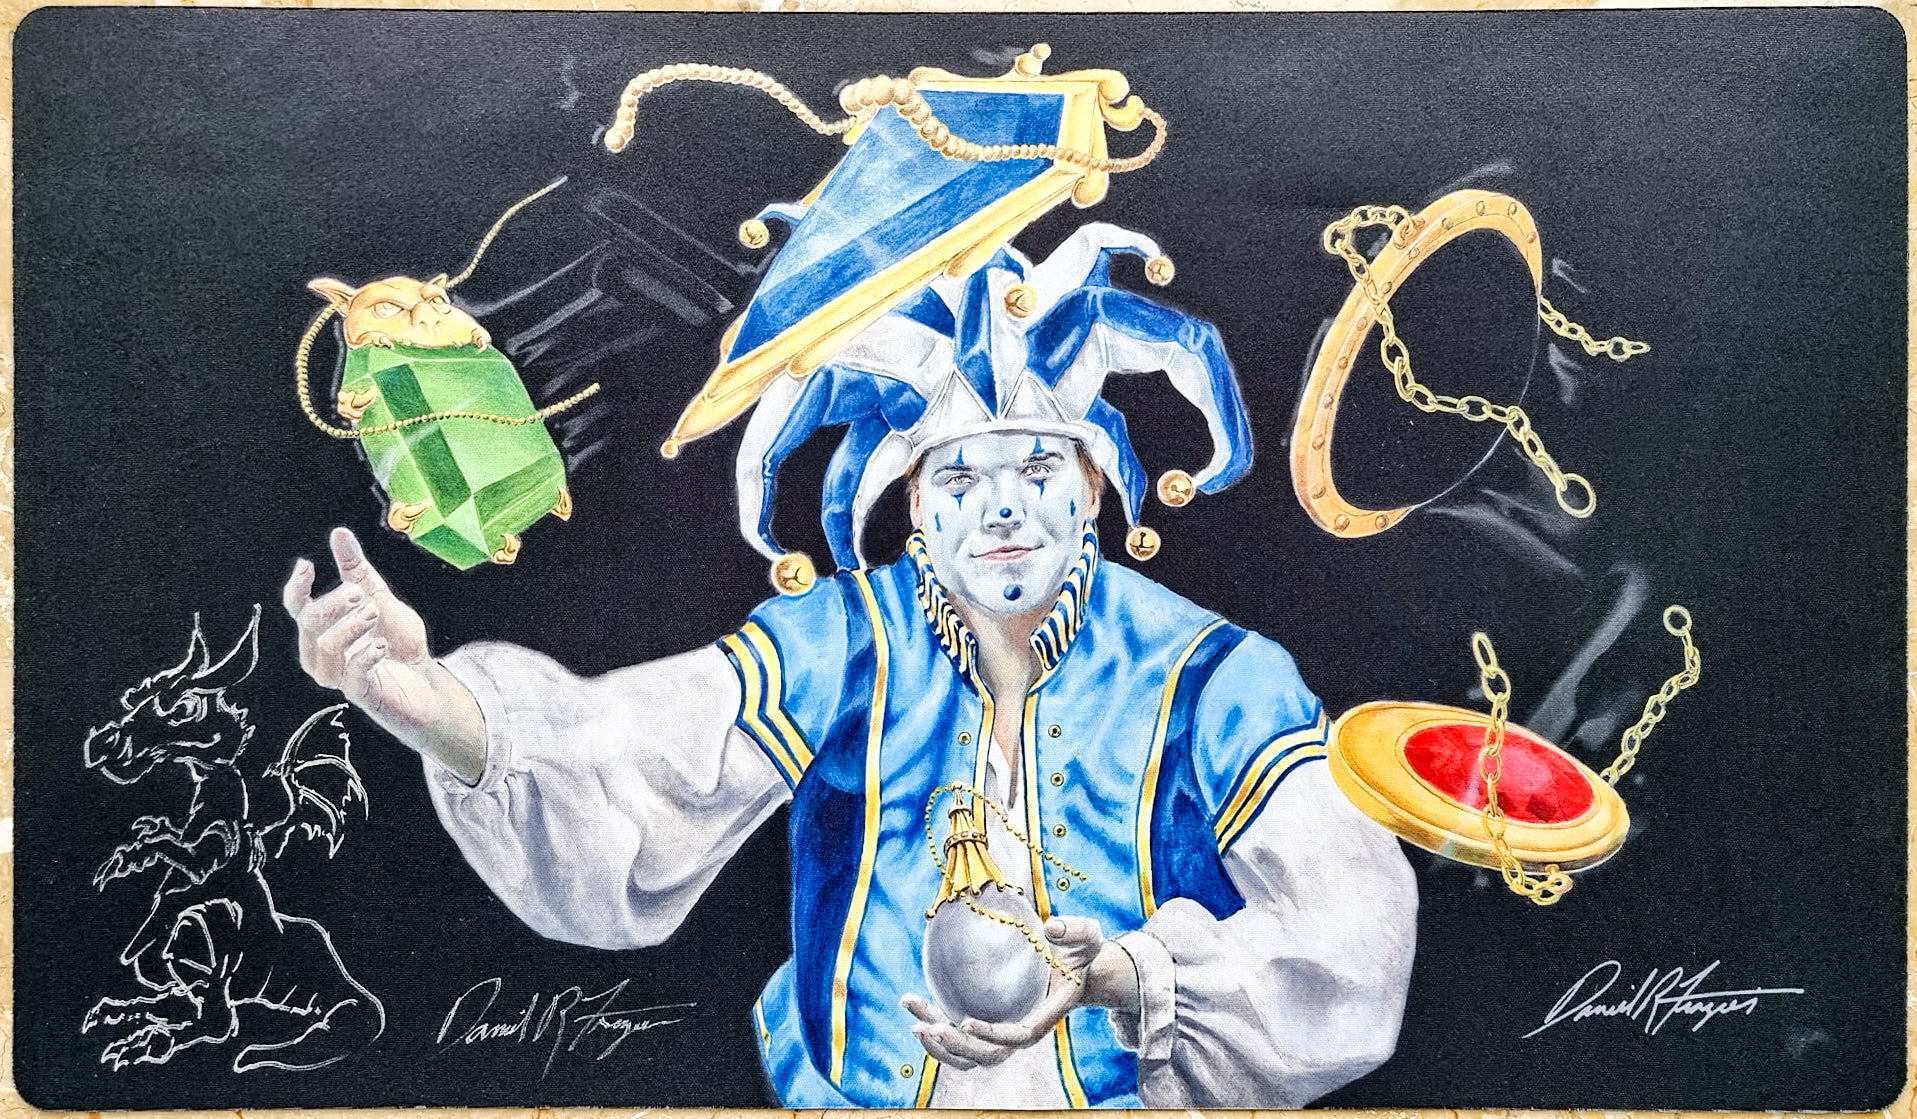 Jester's Moxen - Dan Frazier - Signed by the Artist - Sketched - MTG Playmat